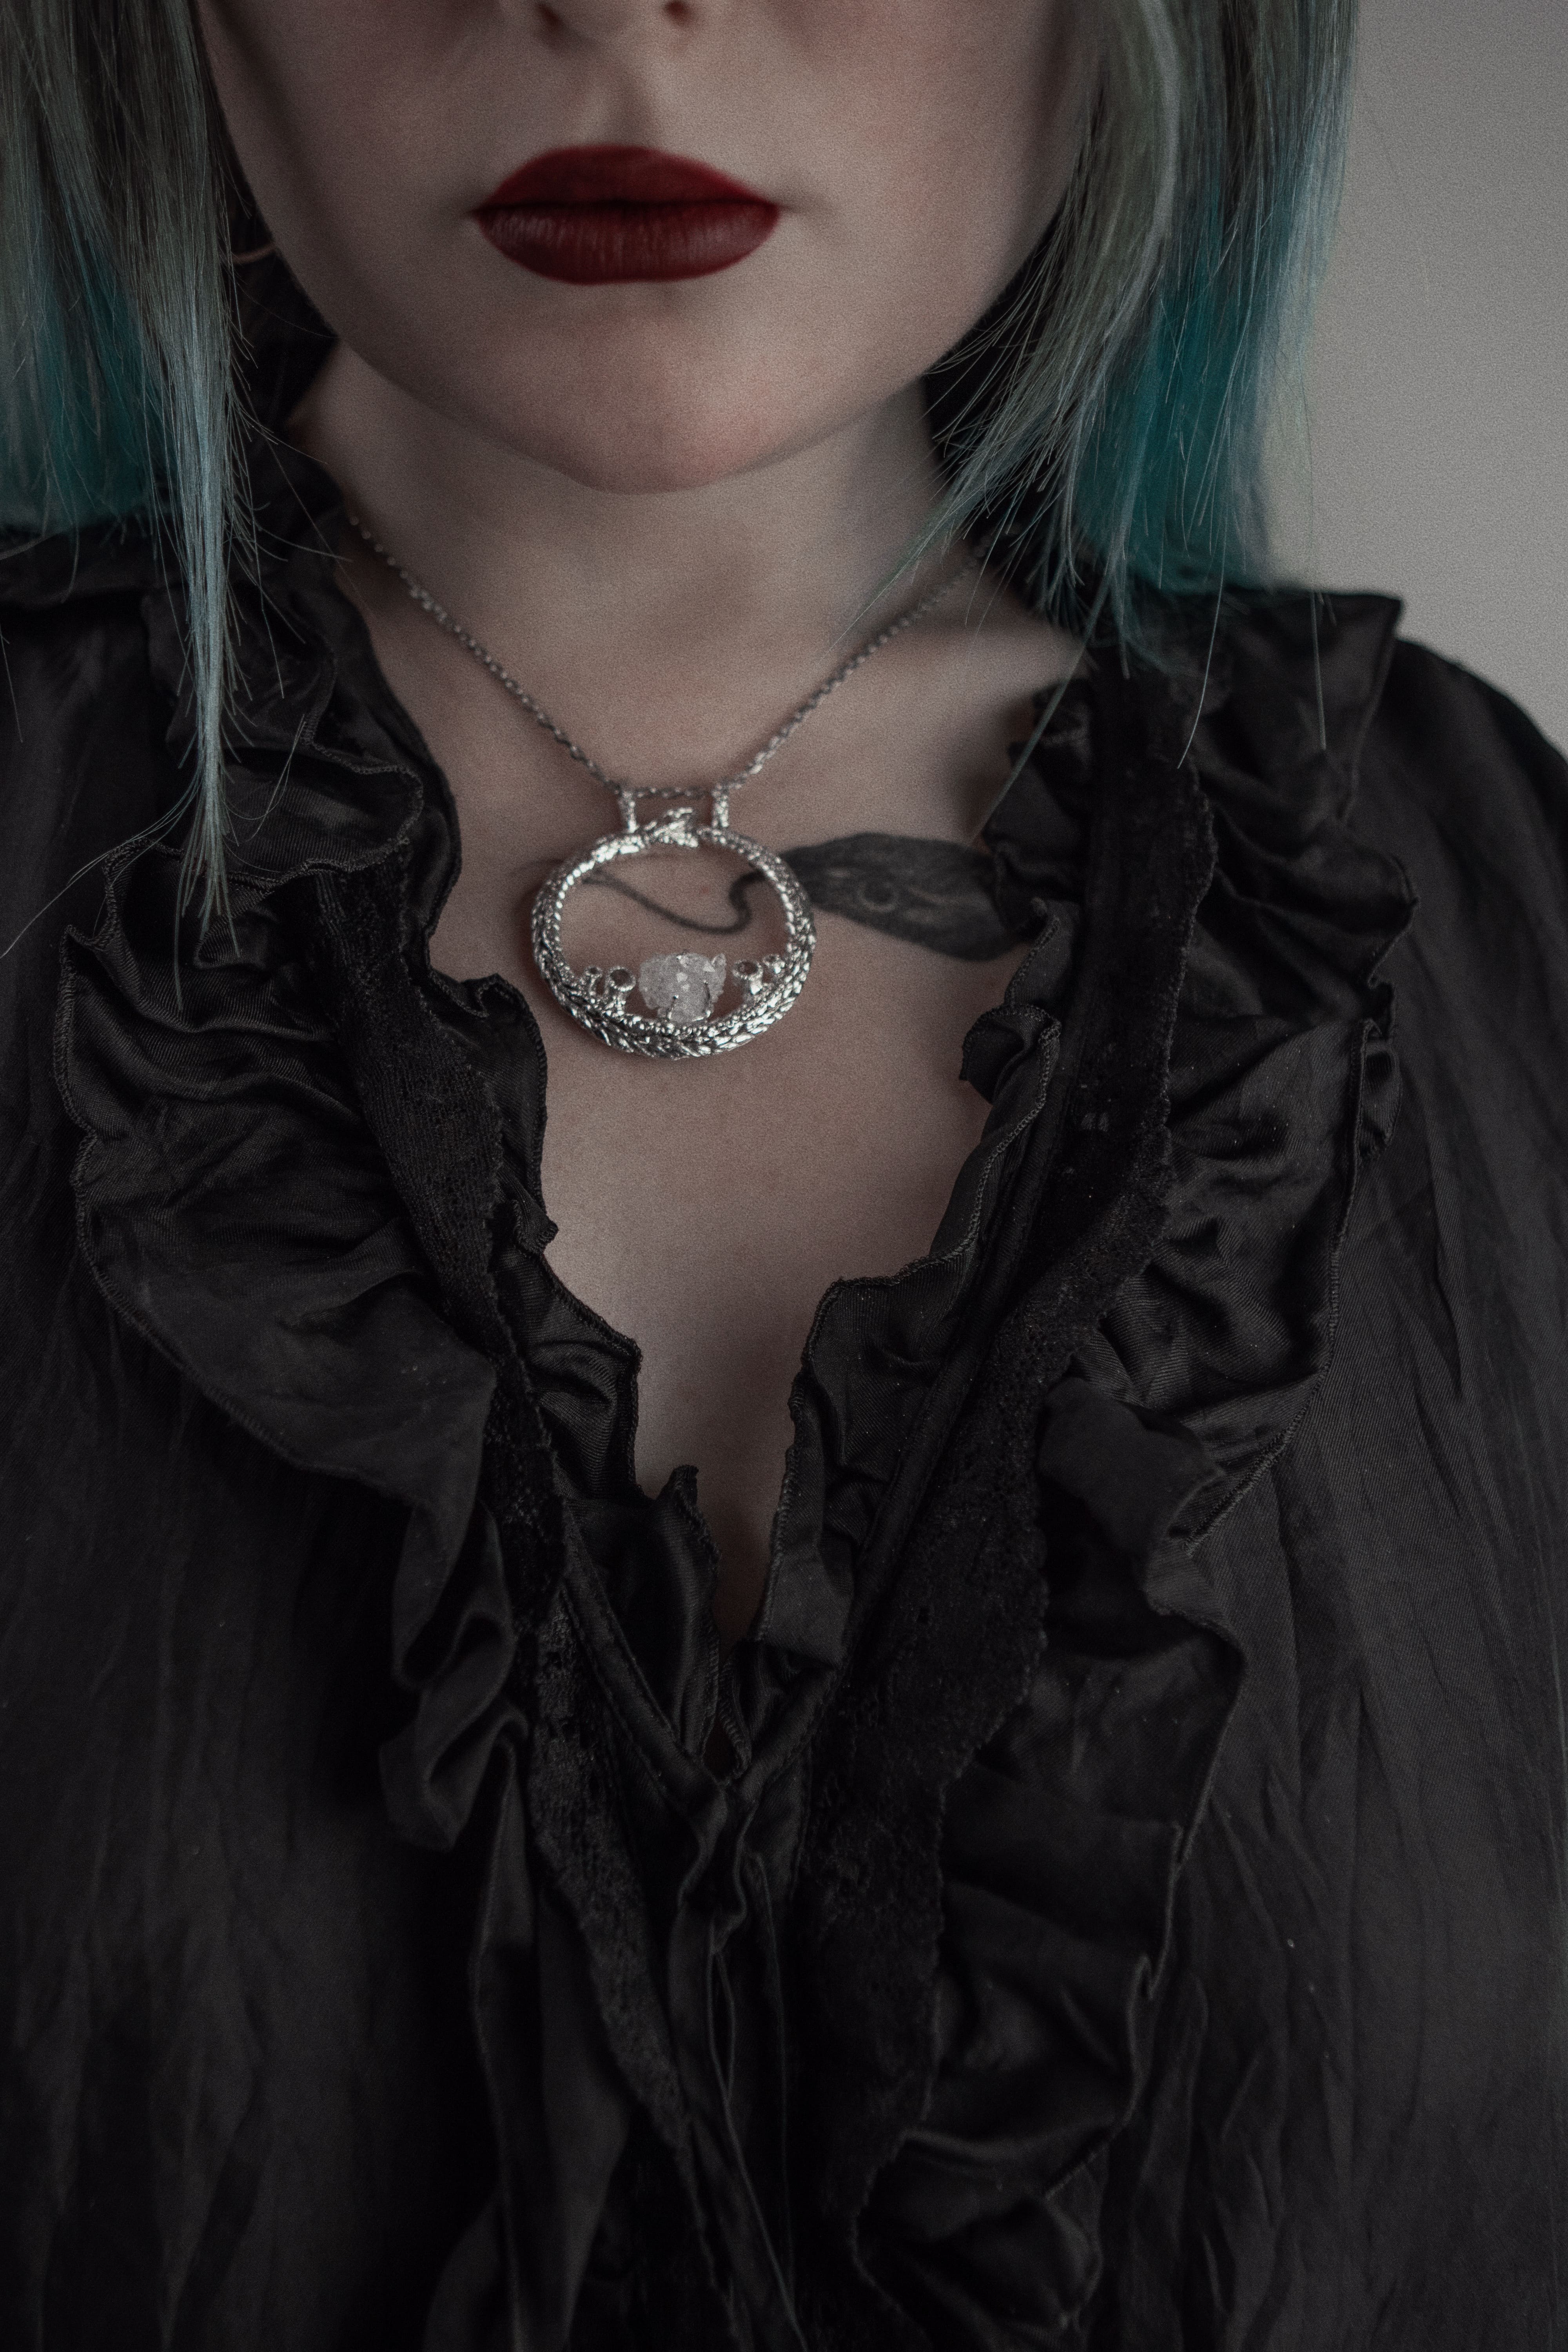 Ouroboros custom pendant with crystal and stones